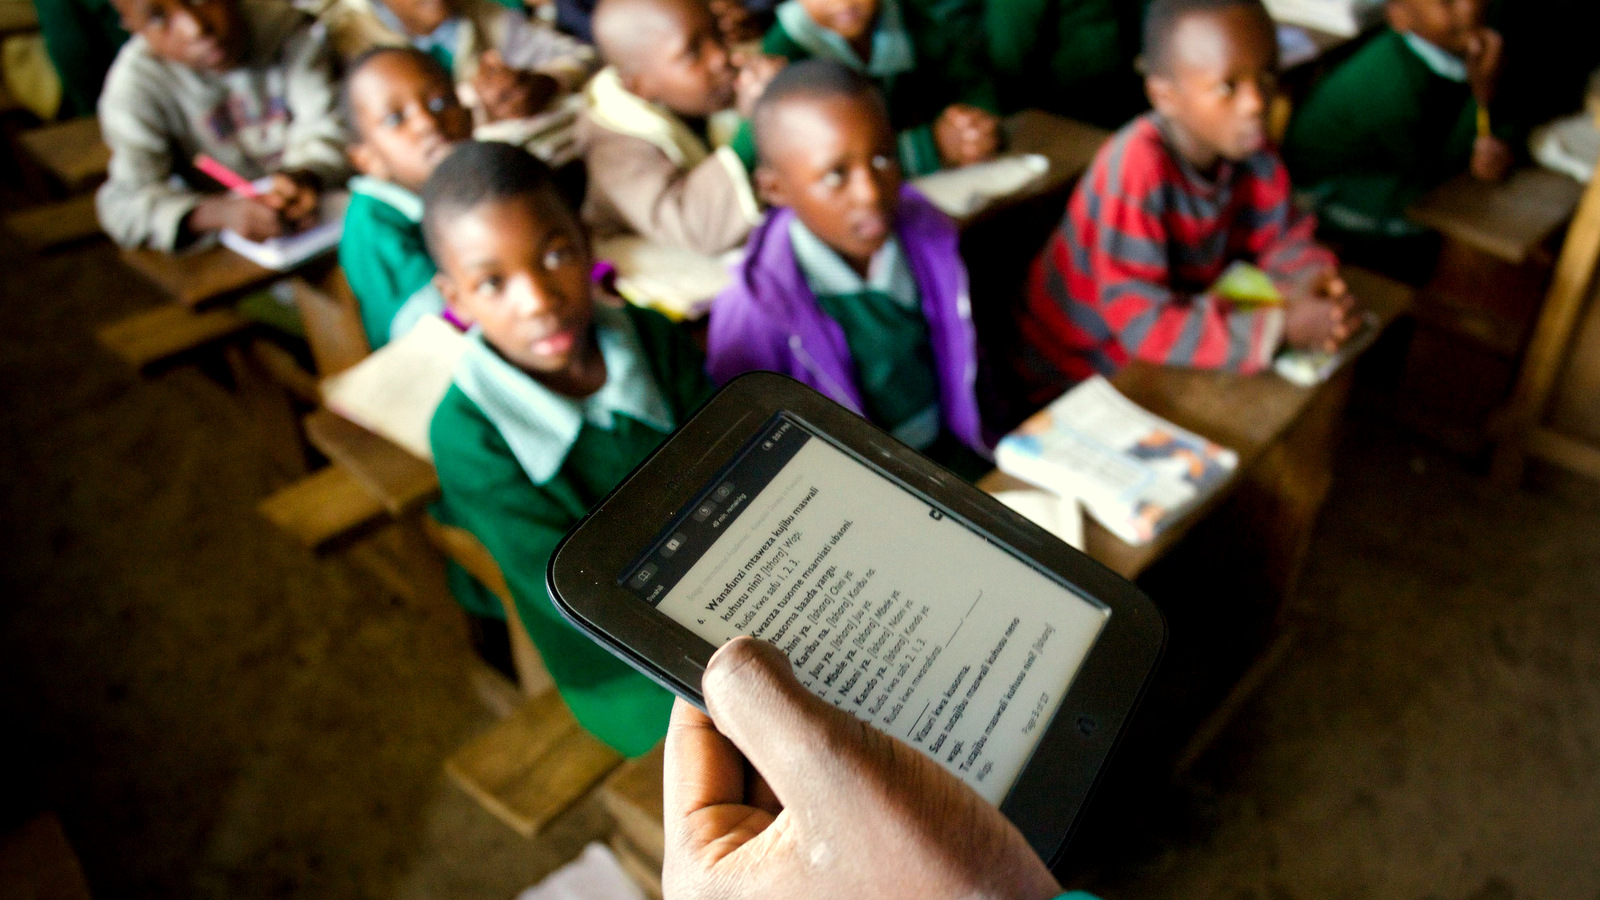 Every lesson is tightly scripted. The teachers deliver lessons by scrolling through the scripts on a tablet. Even small details such as praising students are listed in the class instructions. (Frederic Courbet/NPR)